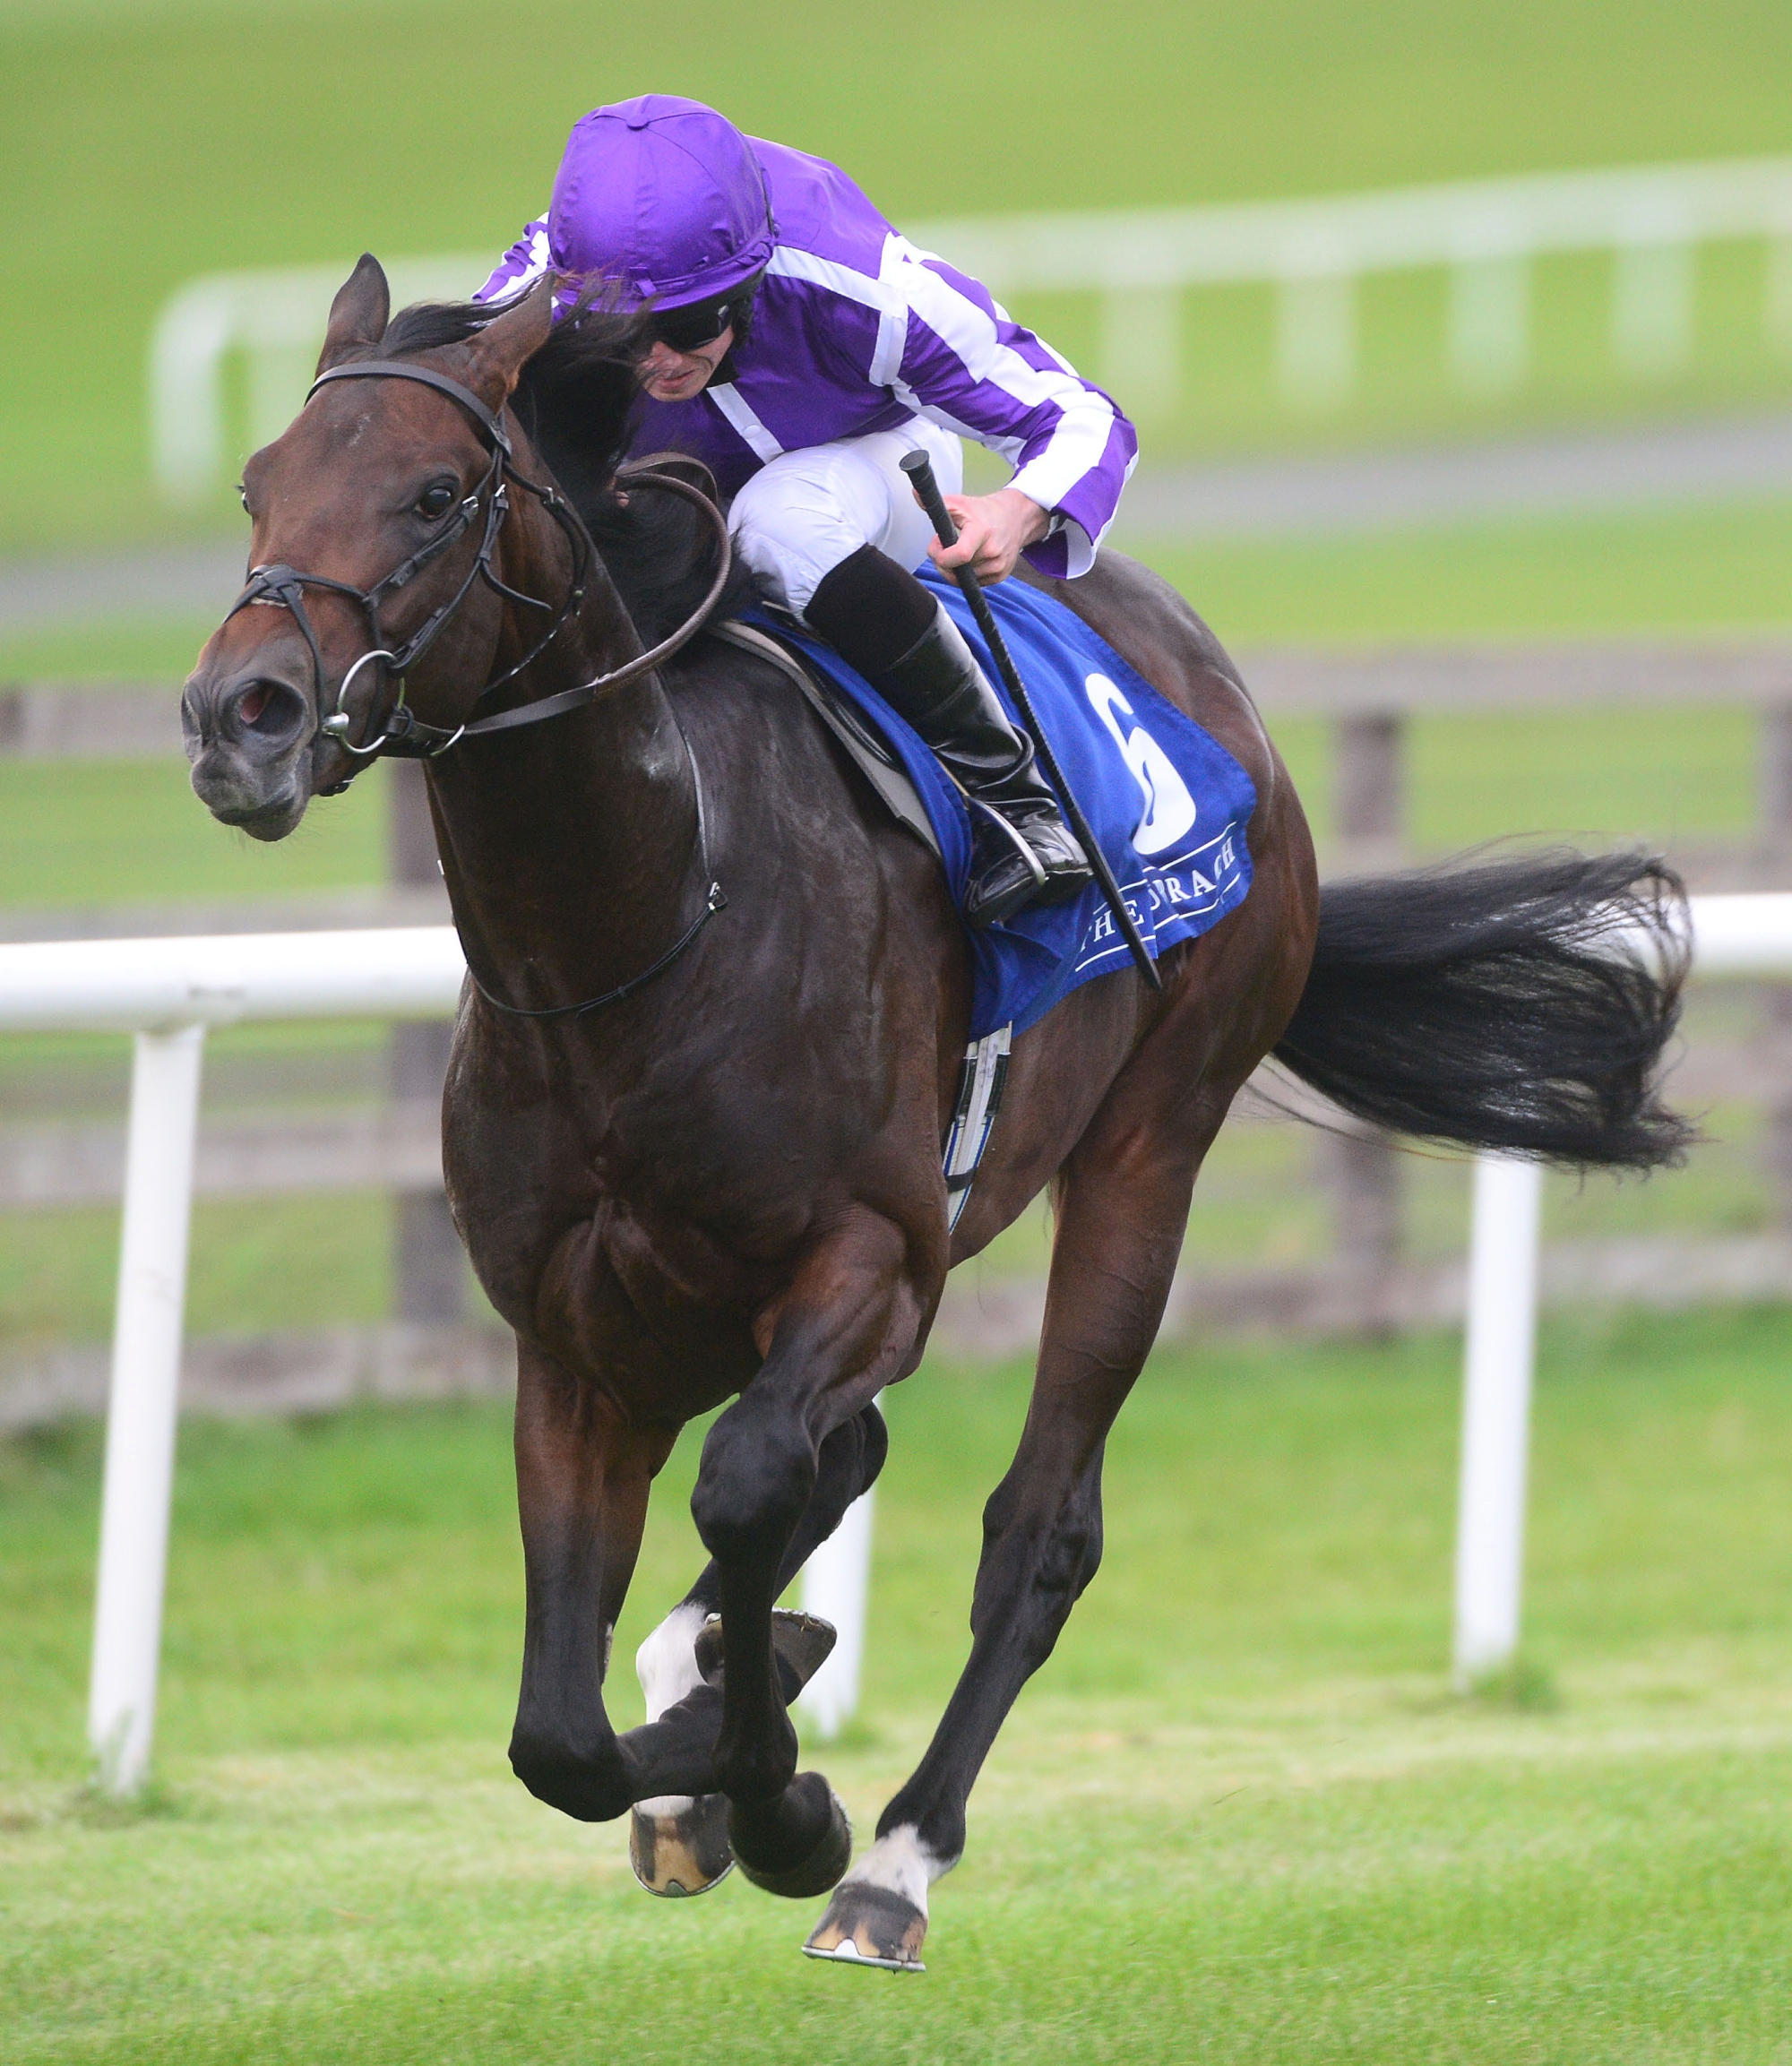 Lope Y Fernandez – IRE : Solid contender from the Ballydoyle brigade who has placed at G1 level four times; latest third to Order Of Australia in Breeders’ Cup Mile at Keeneland.